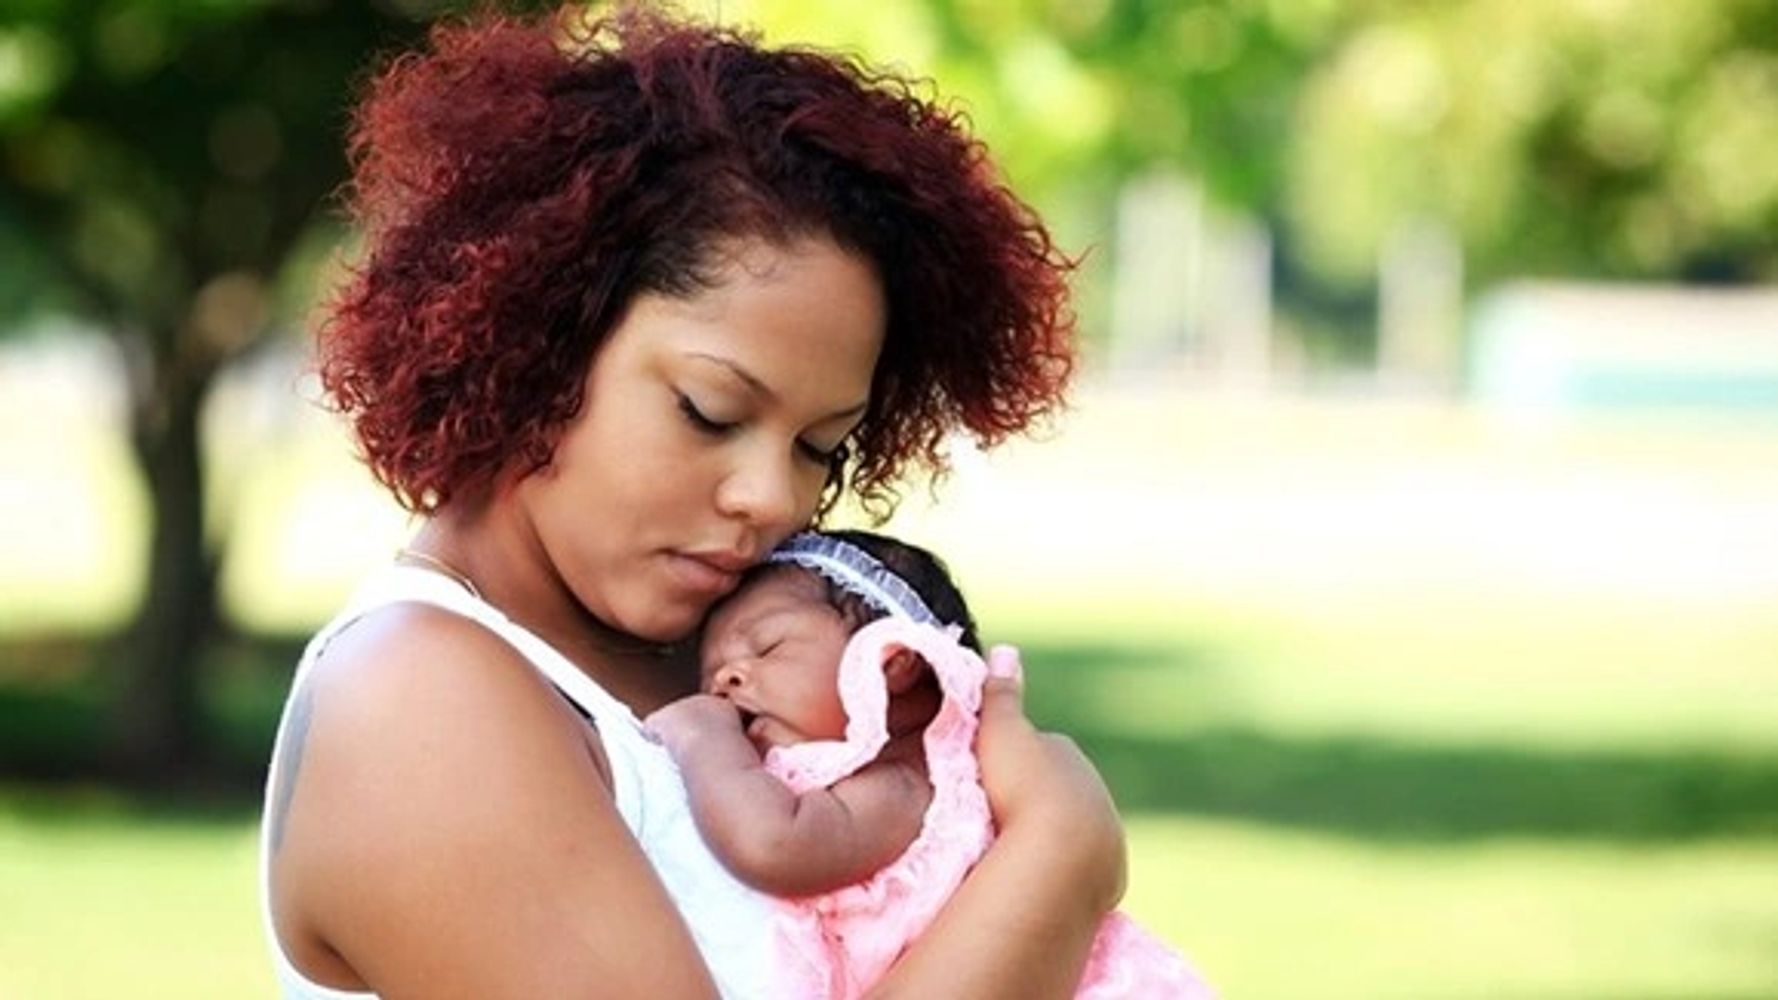 Woman holding her infant baby with blurred outdoor background